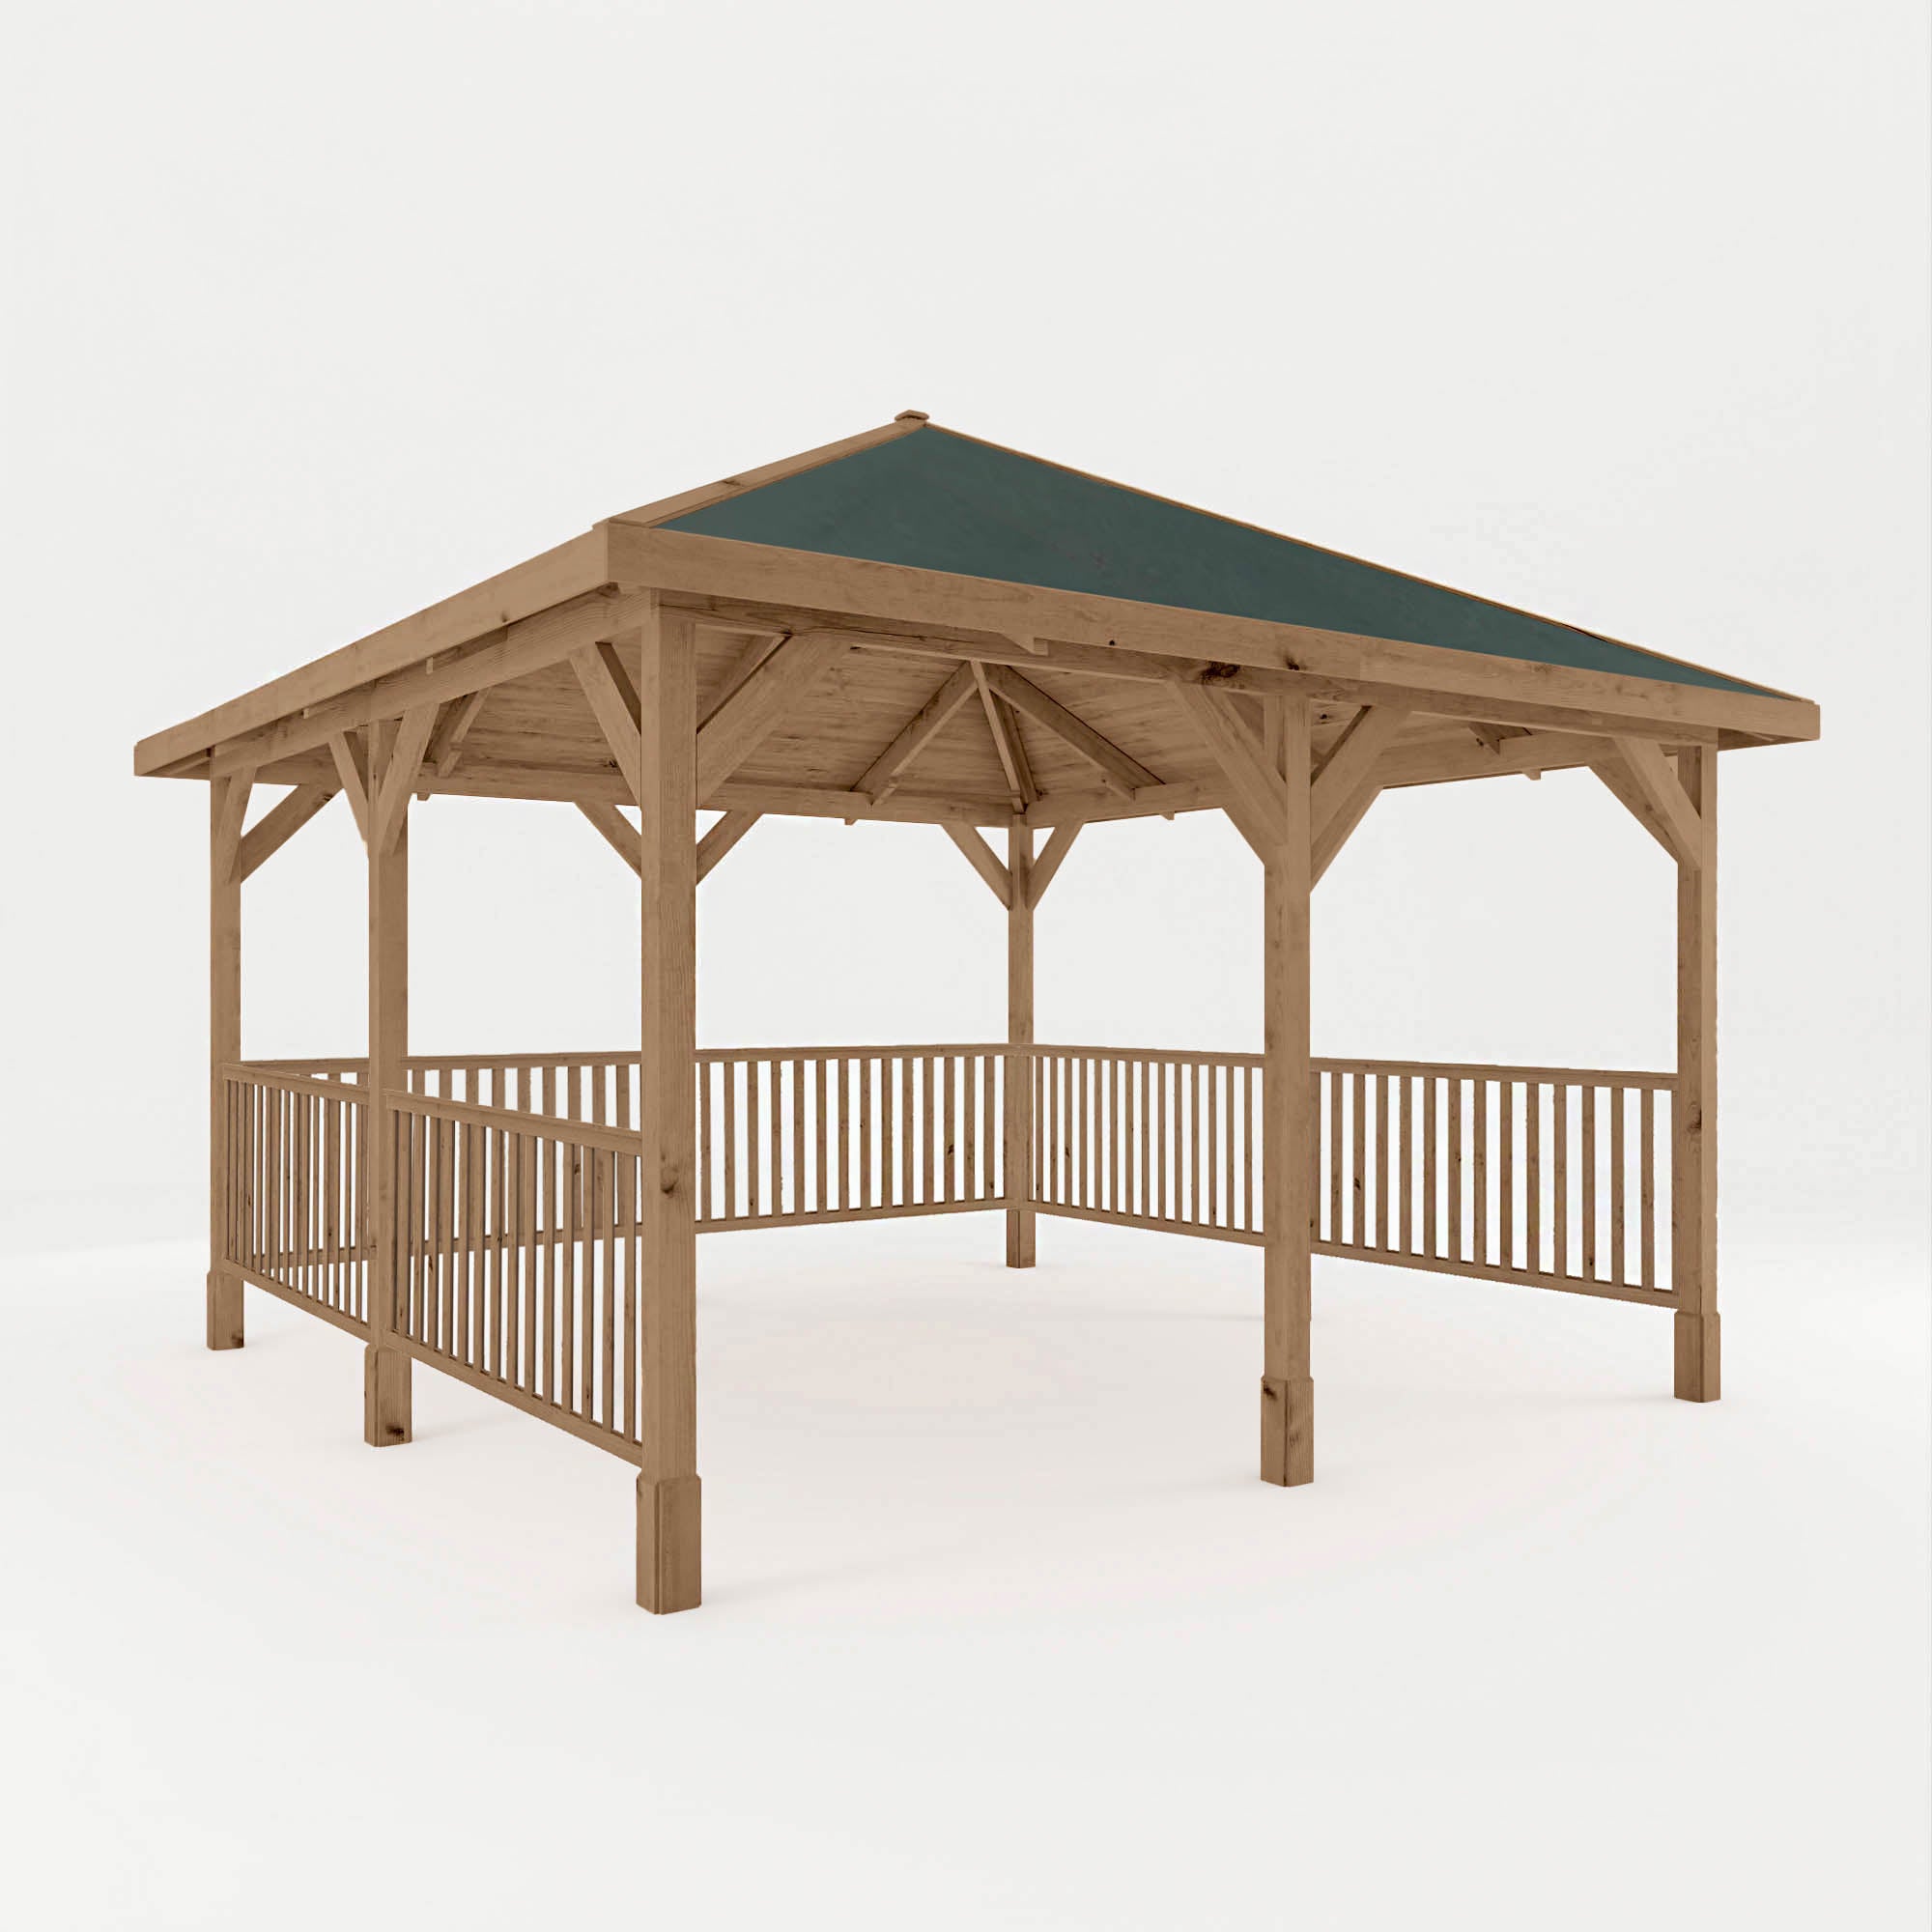 4m x 4m Pressure Treated Gazebo with Roof and Framed Rails